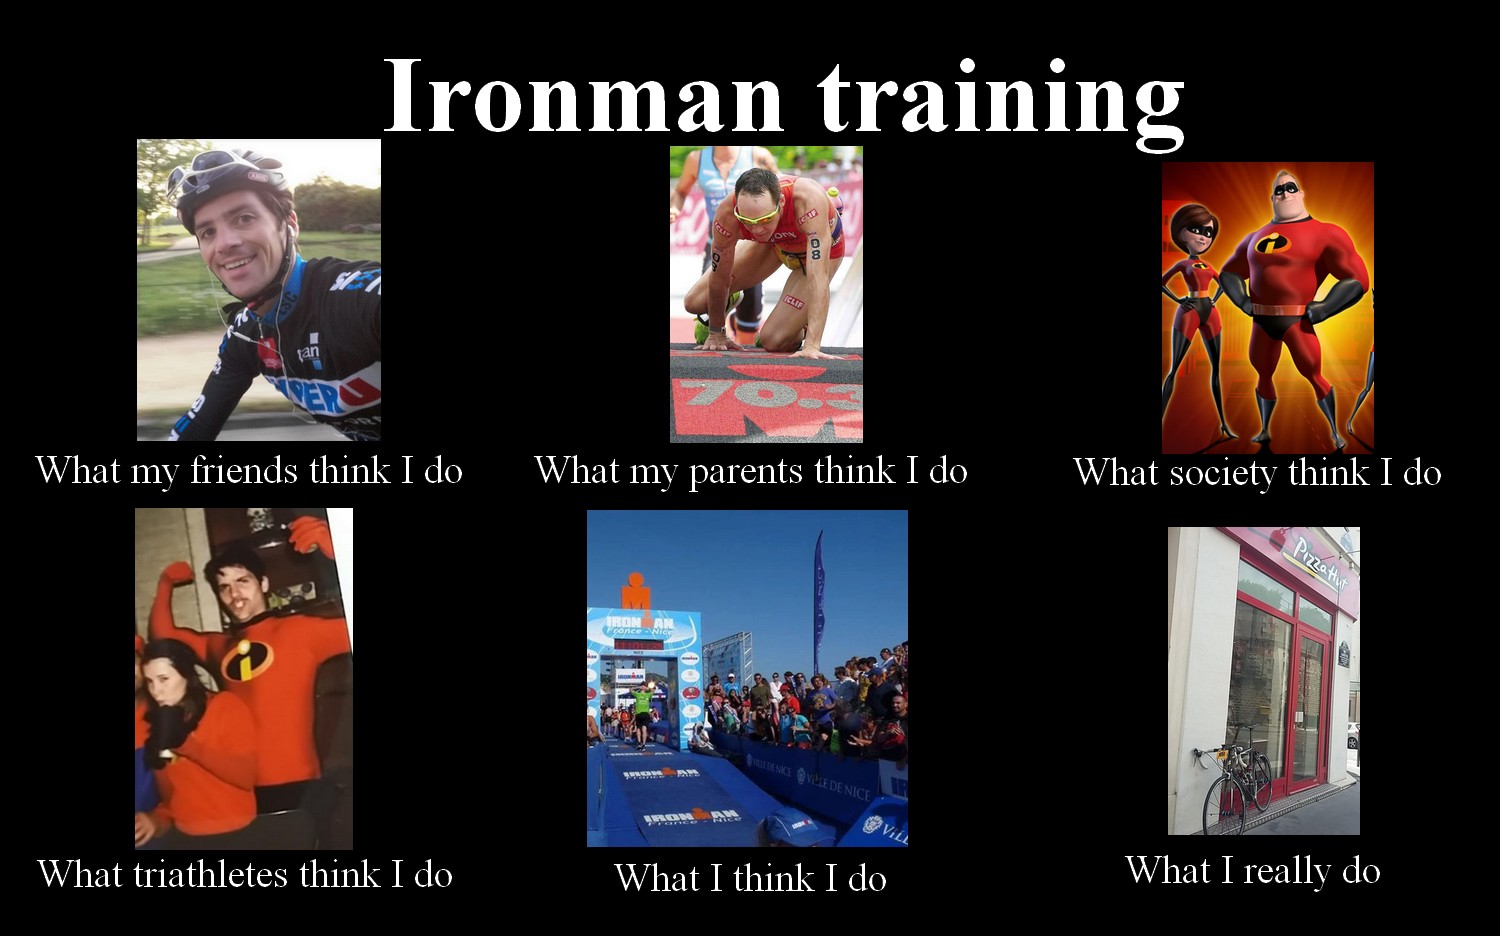 what my friends think I do - ironman